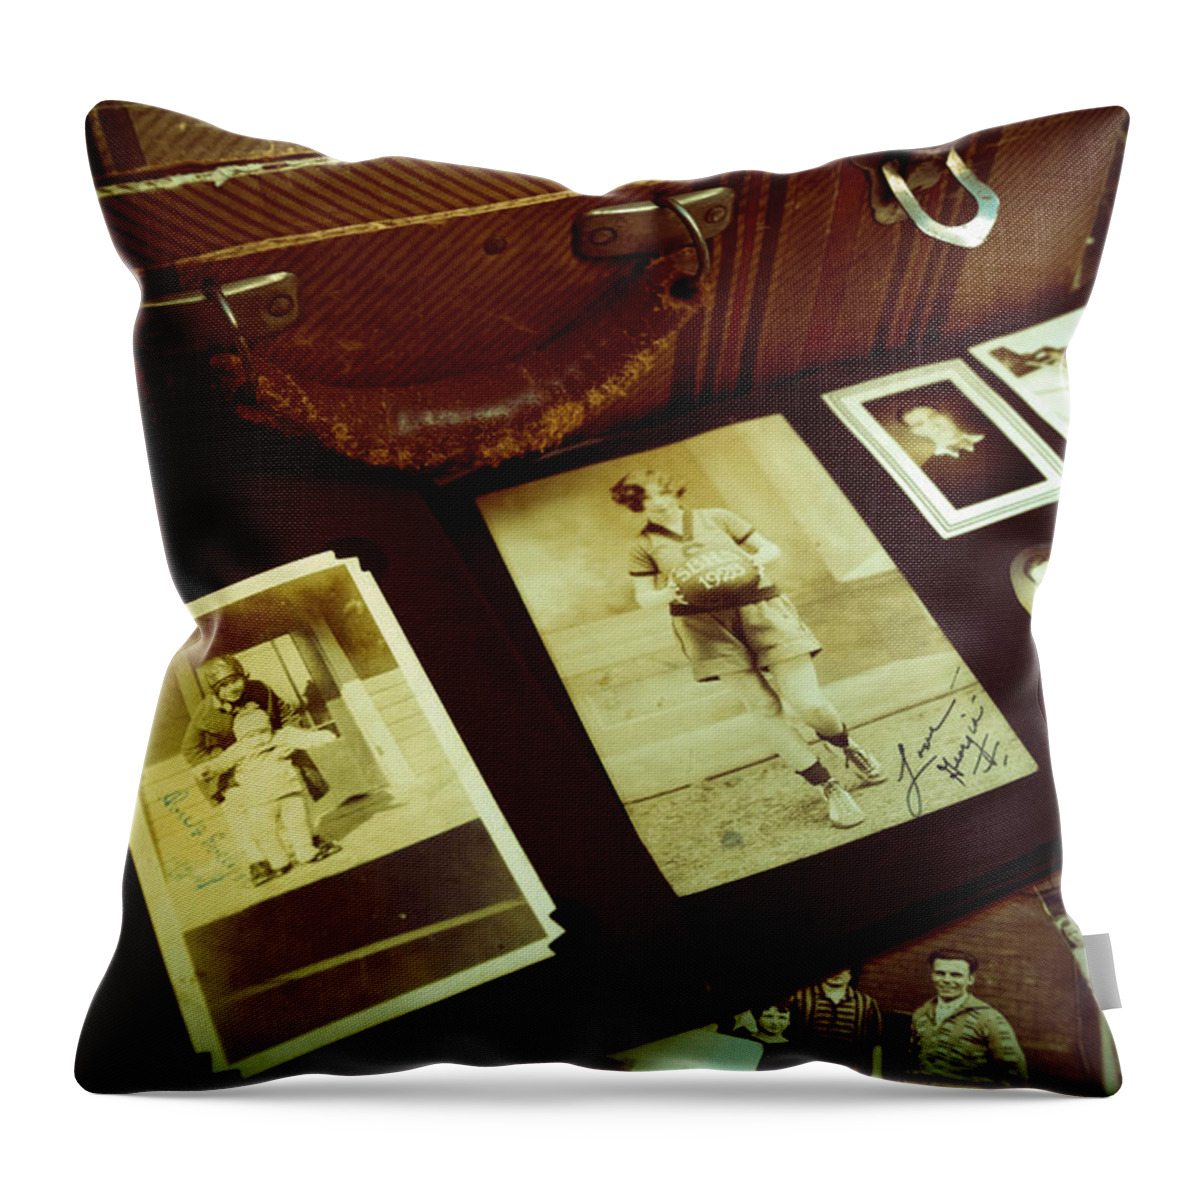 Album Throw Pillow featuring the photograph Battered Suitcase of Antique Photographs by Amy Cicconi